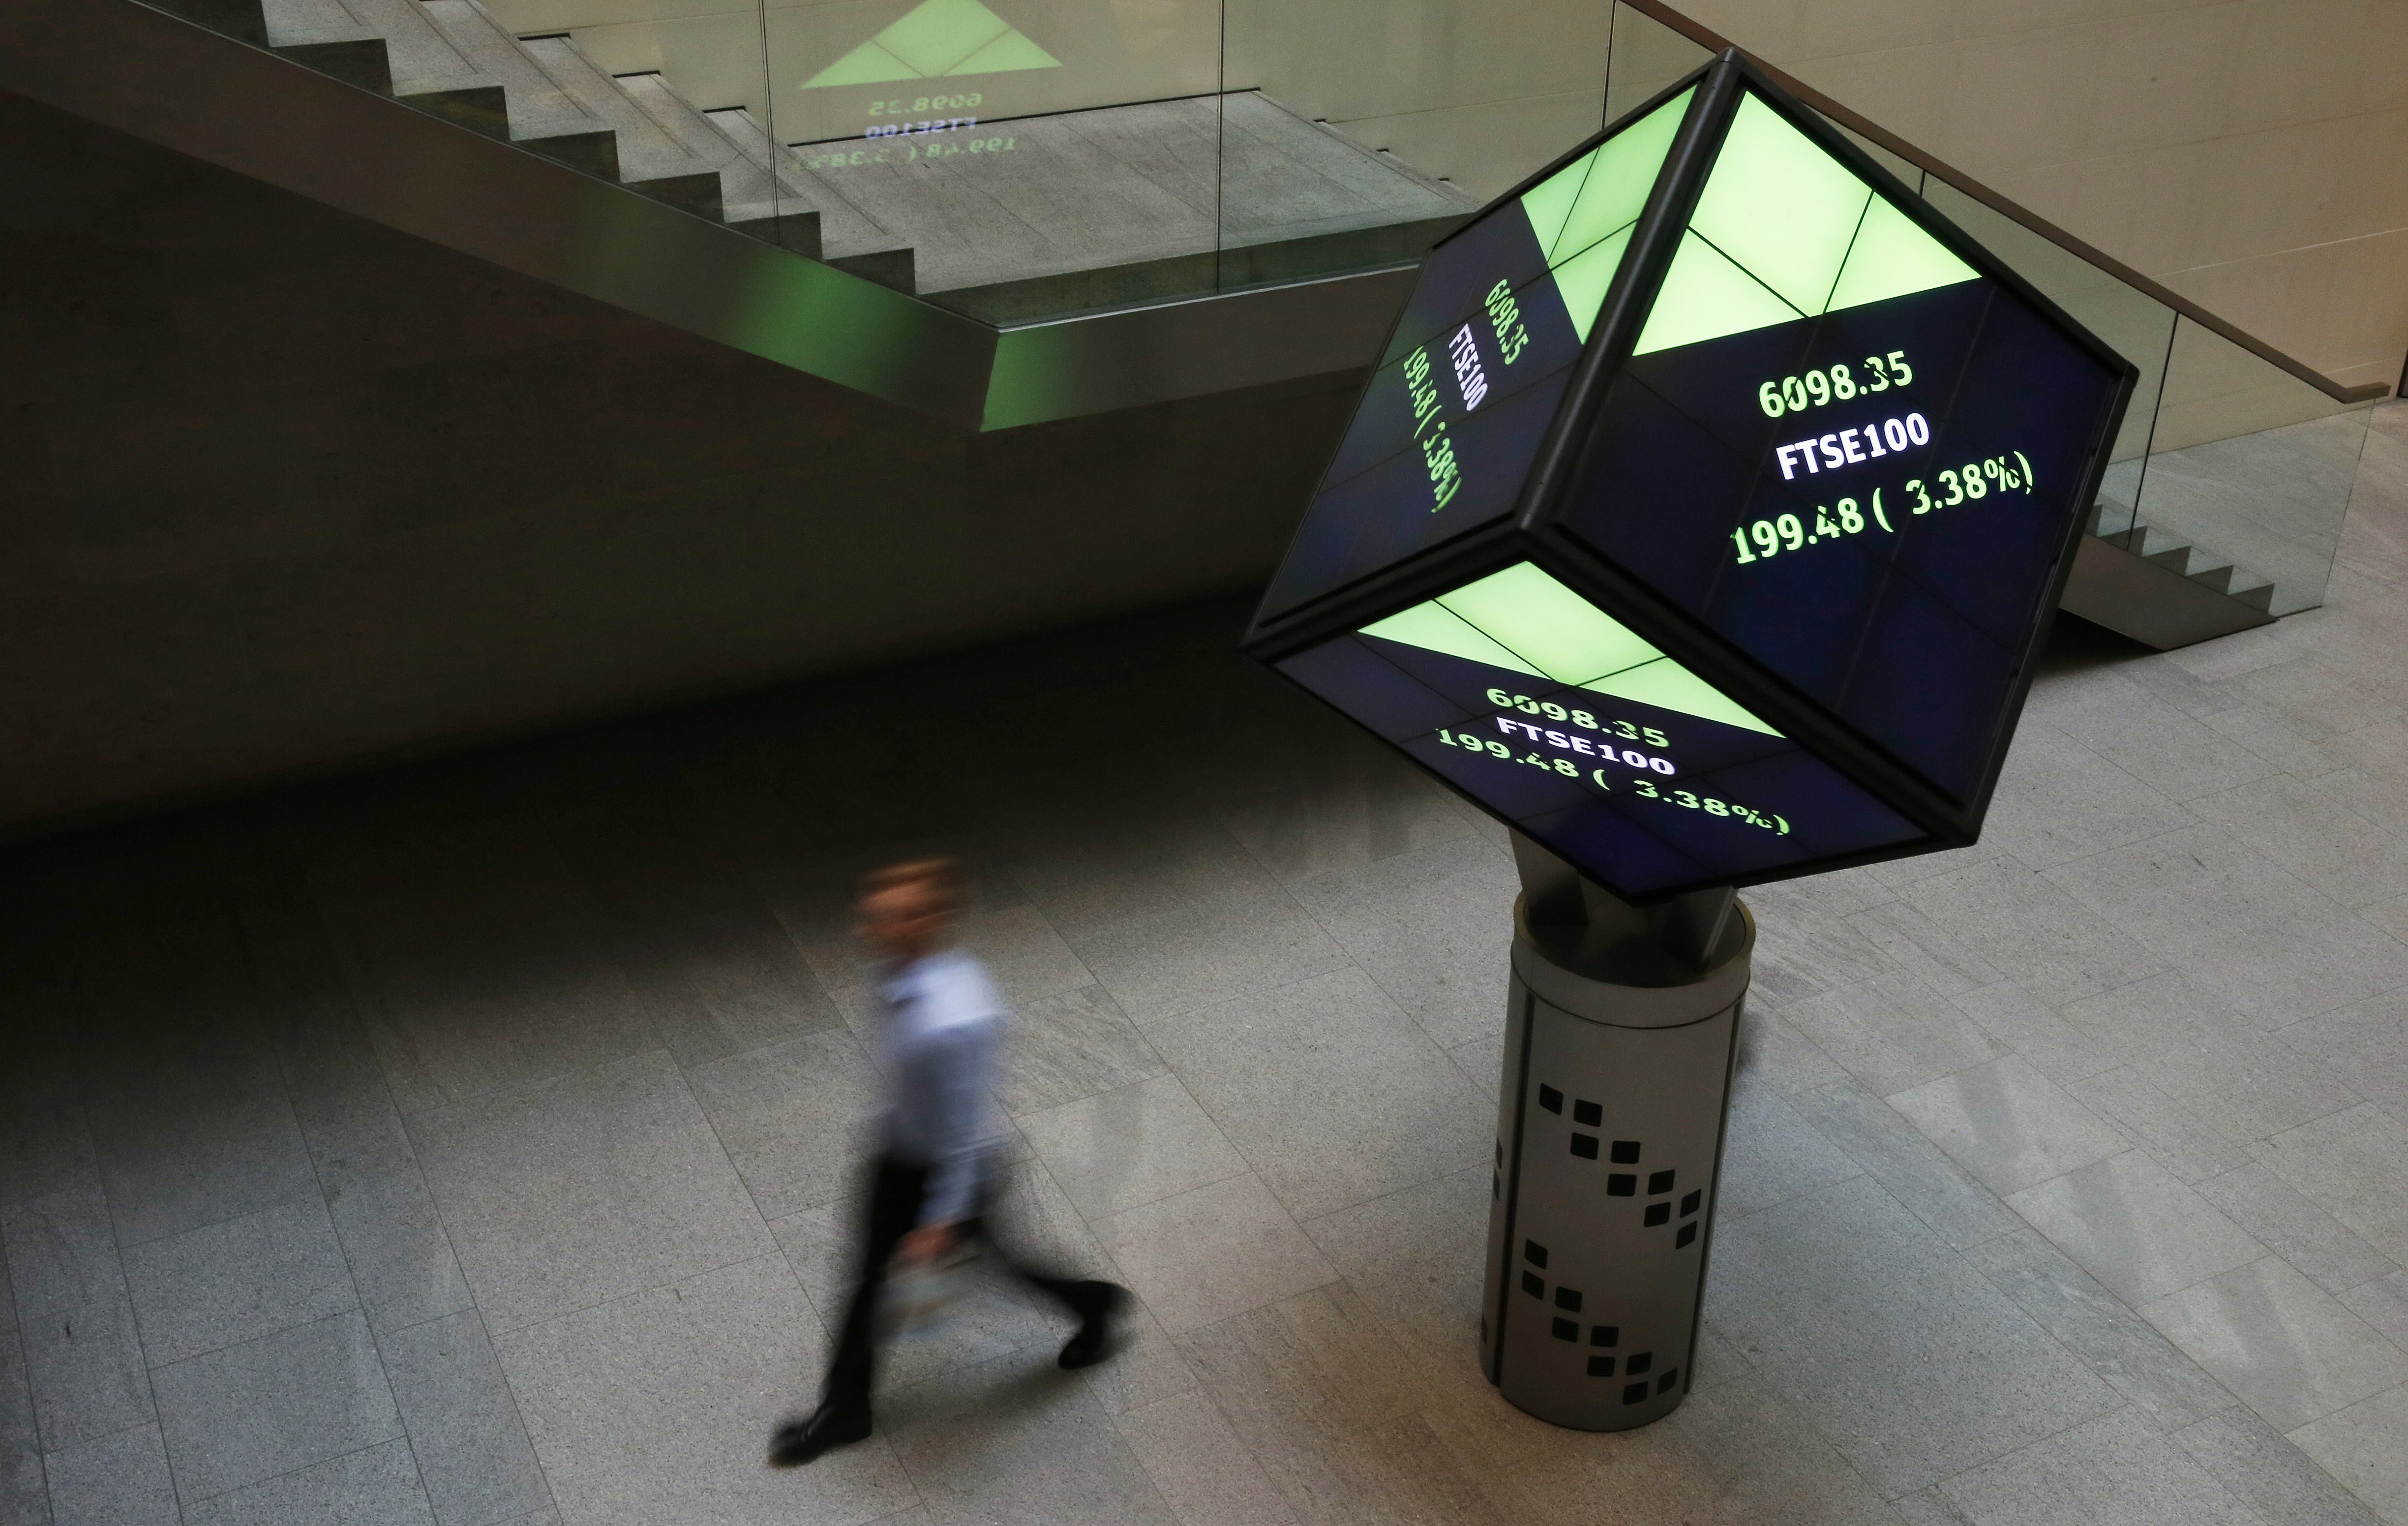 A man walks through the lobby of the London Stock Exchange in London, Britain August 25, 2015.  REUTERS/Suzanne Plunkett